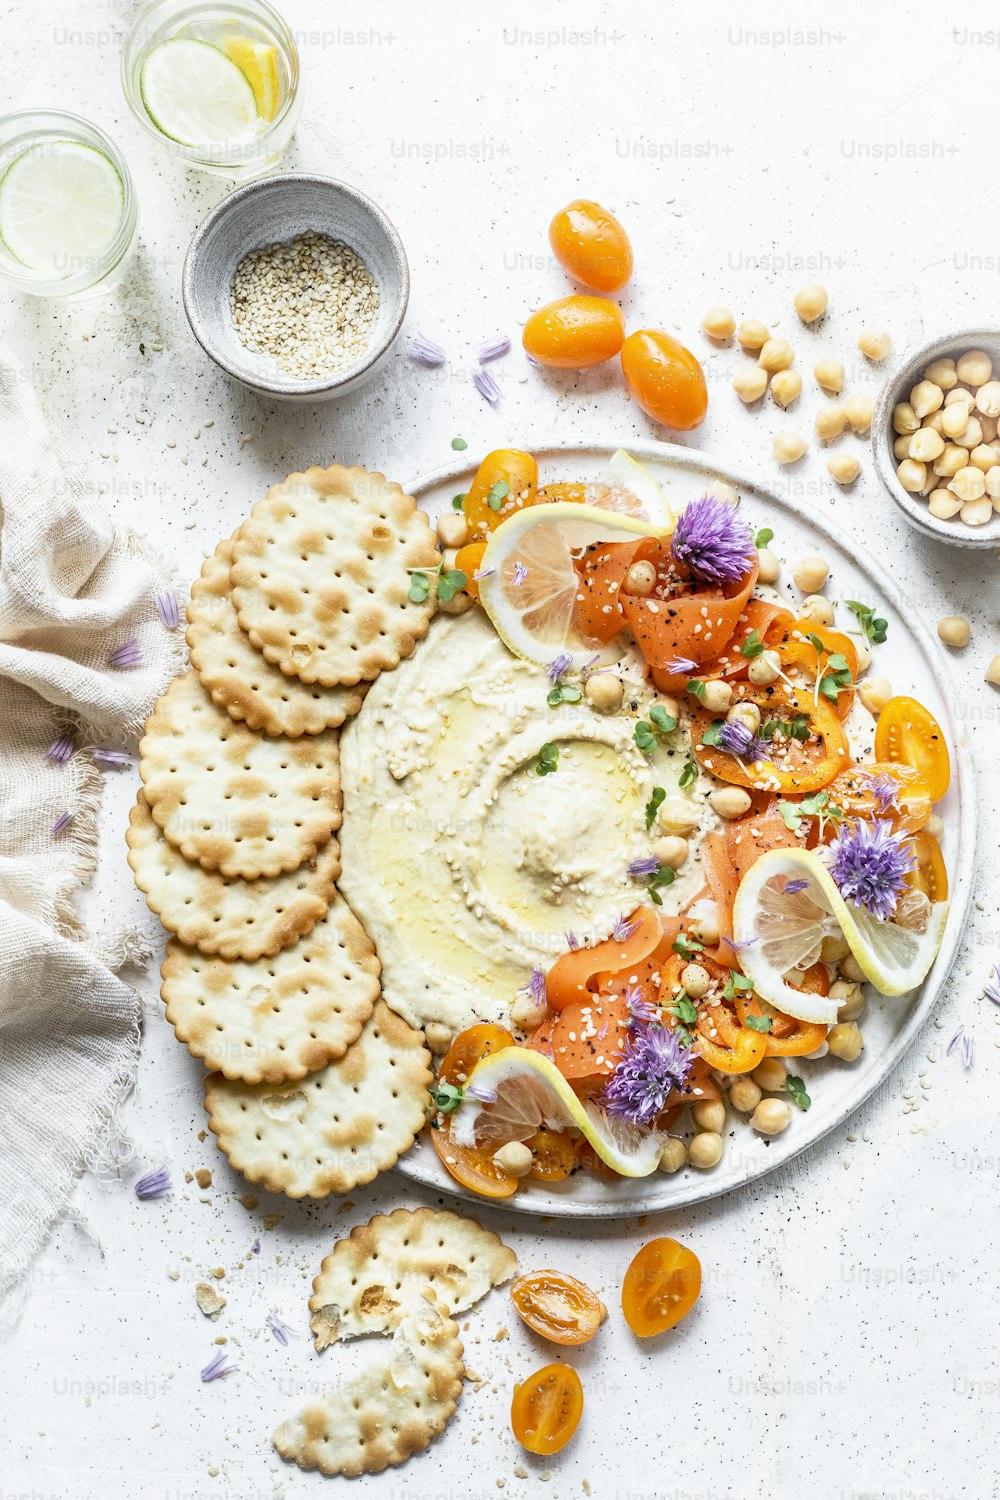 a plate of crackers, crackers, and vegetables on a table